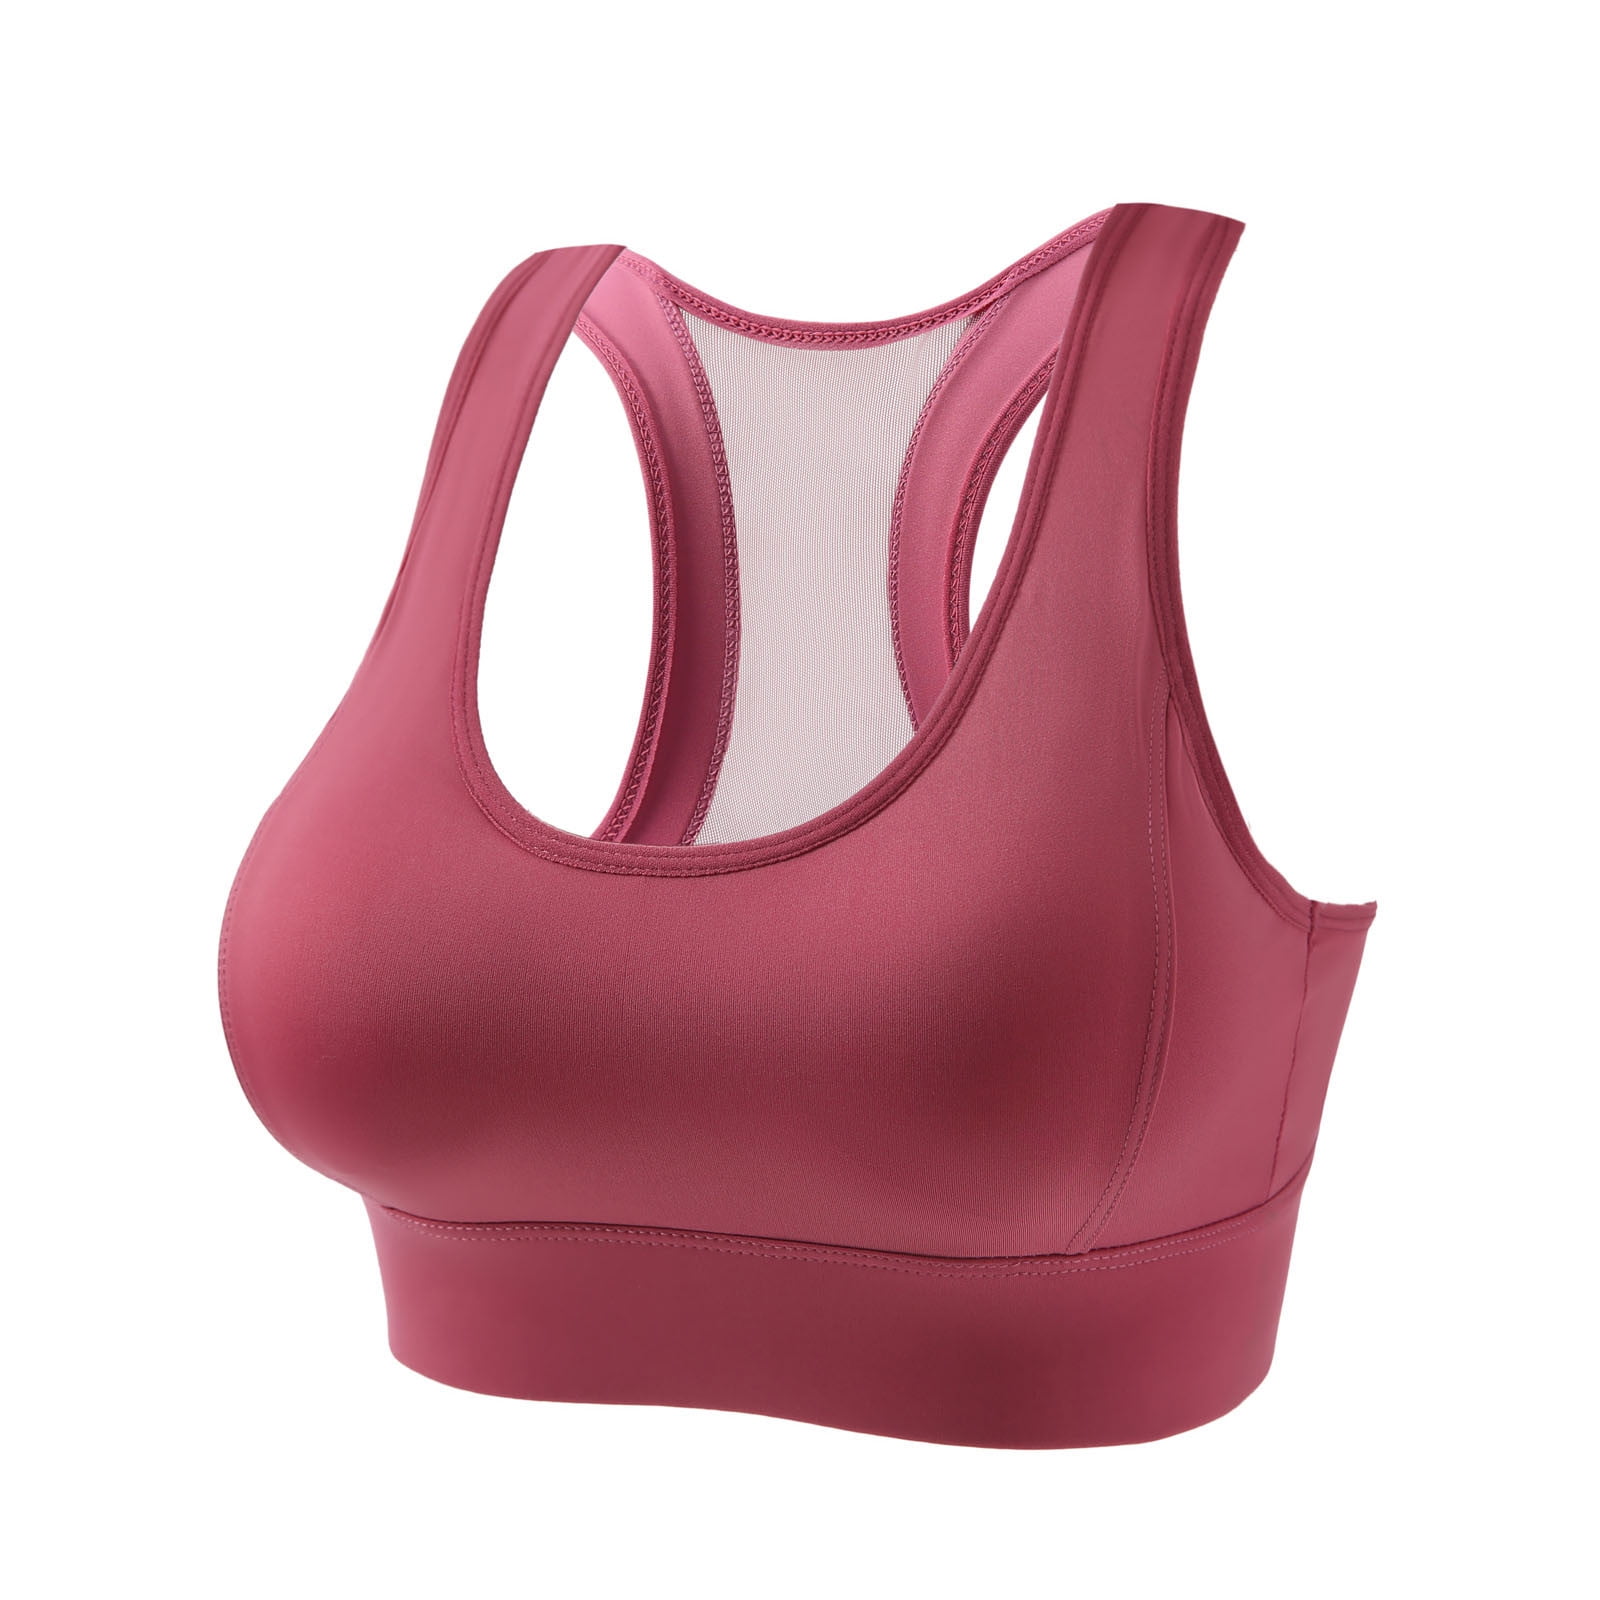 PMUYBHF Sports Bras for Women Large Bust Adjustable Women Personality  Shoulder Strap Sports underwear Water Drop Type Ssexy Back Earthquake Anti  Proof